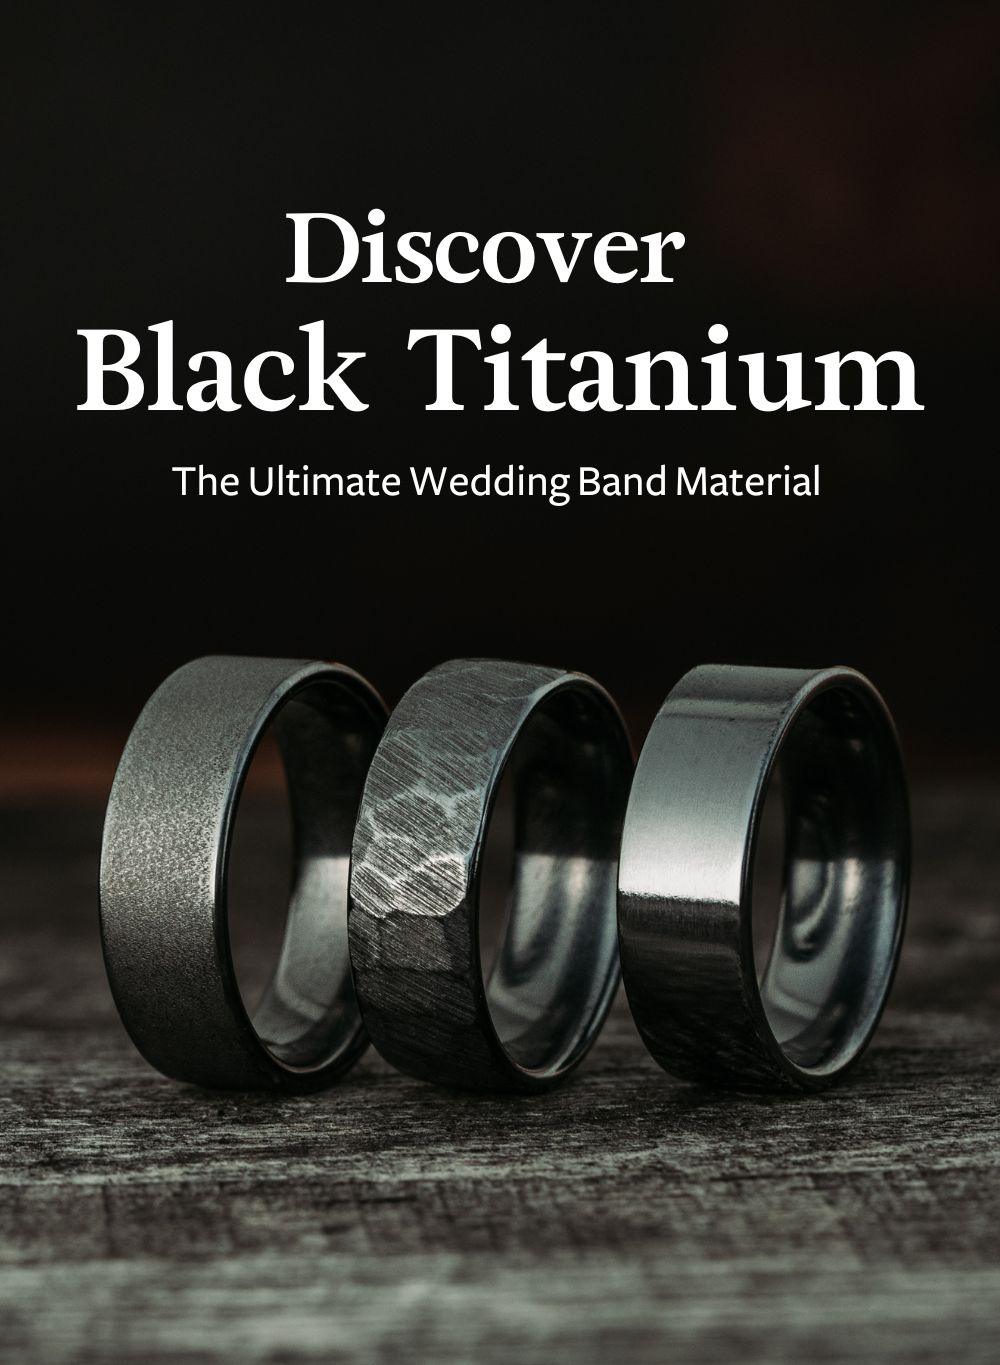 Discover Black Titanium: The Ultimate Wedding Band Material for Unmatched Durability and Style